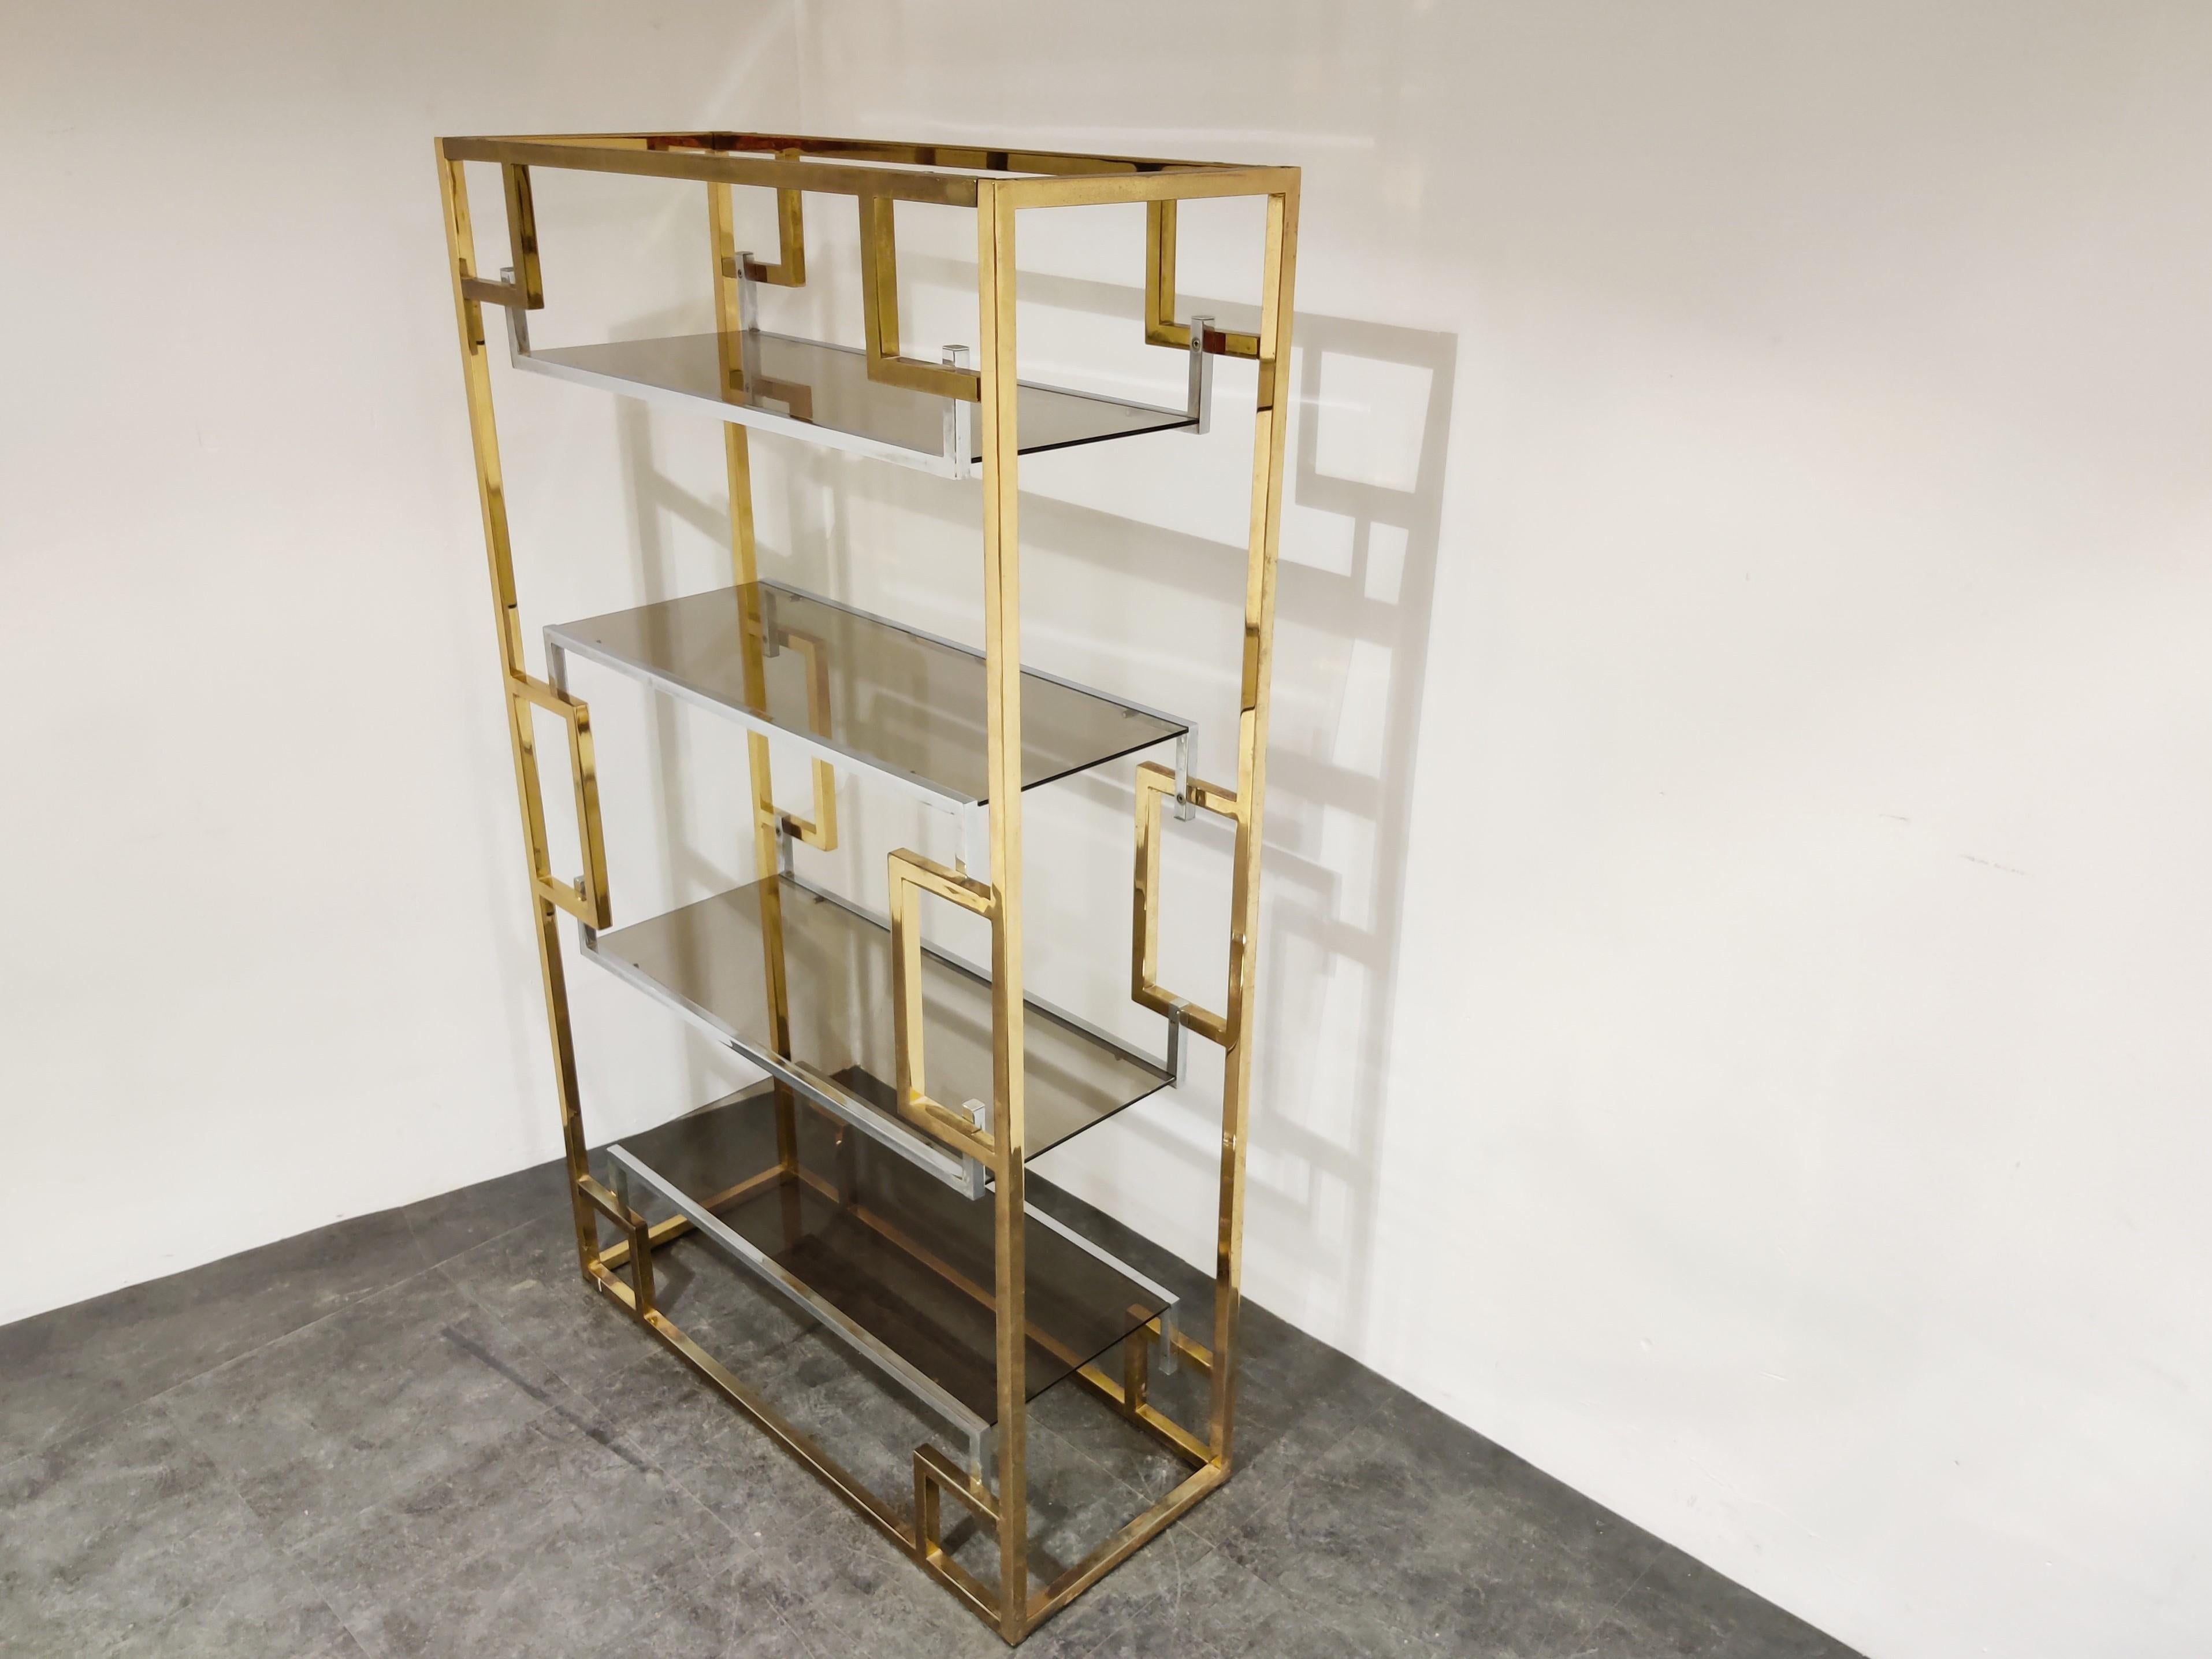 Hollywood regency wall unit designed by Willy Rizzo.

It consists of symmetrical brass and chrome shelves with smoked glass tops.

Original condition, some wear on the brass and chrome, original glass.

1970s, Italy

Measures: Height 180 cm/